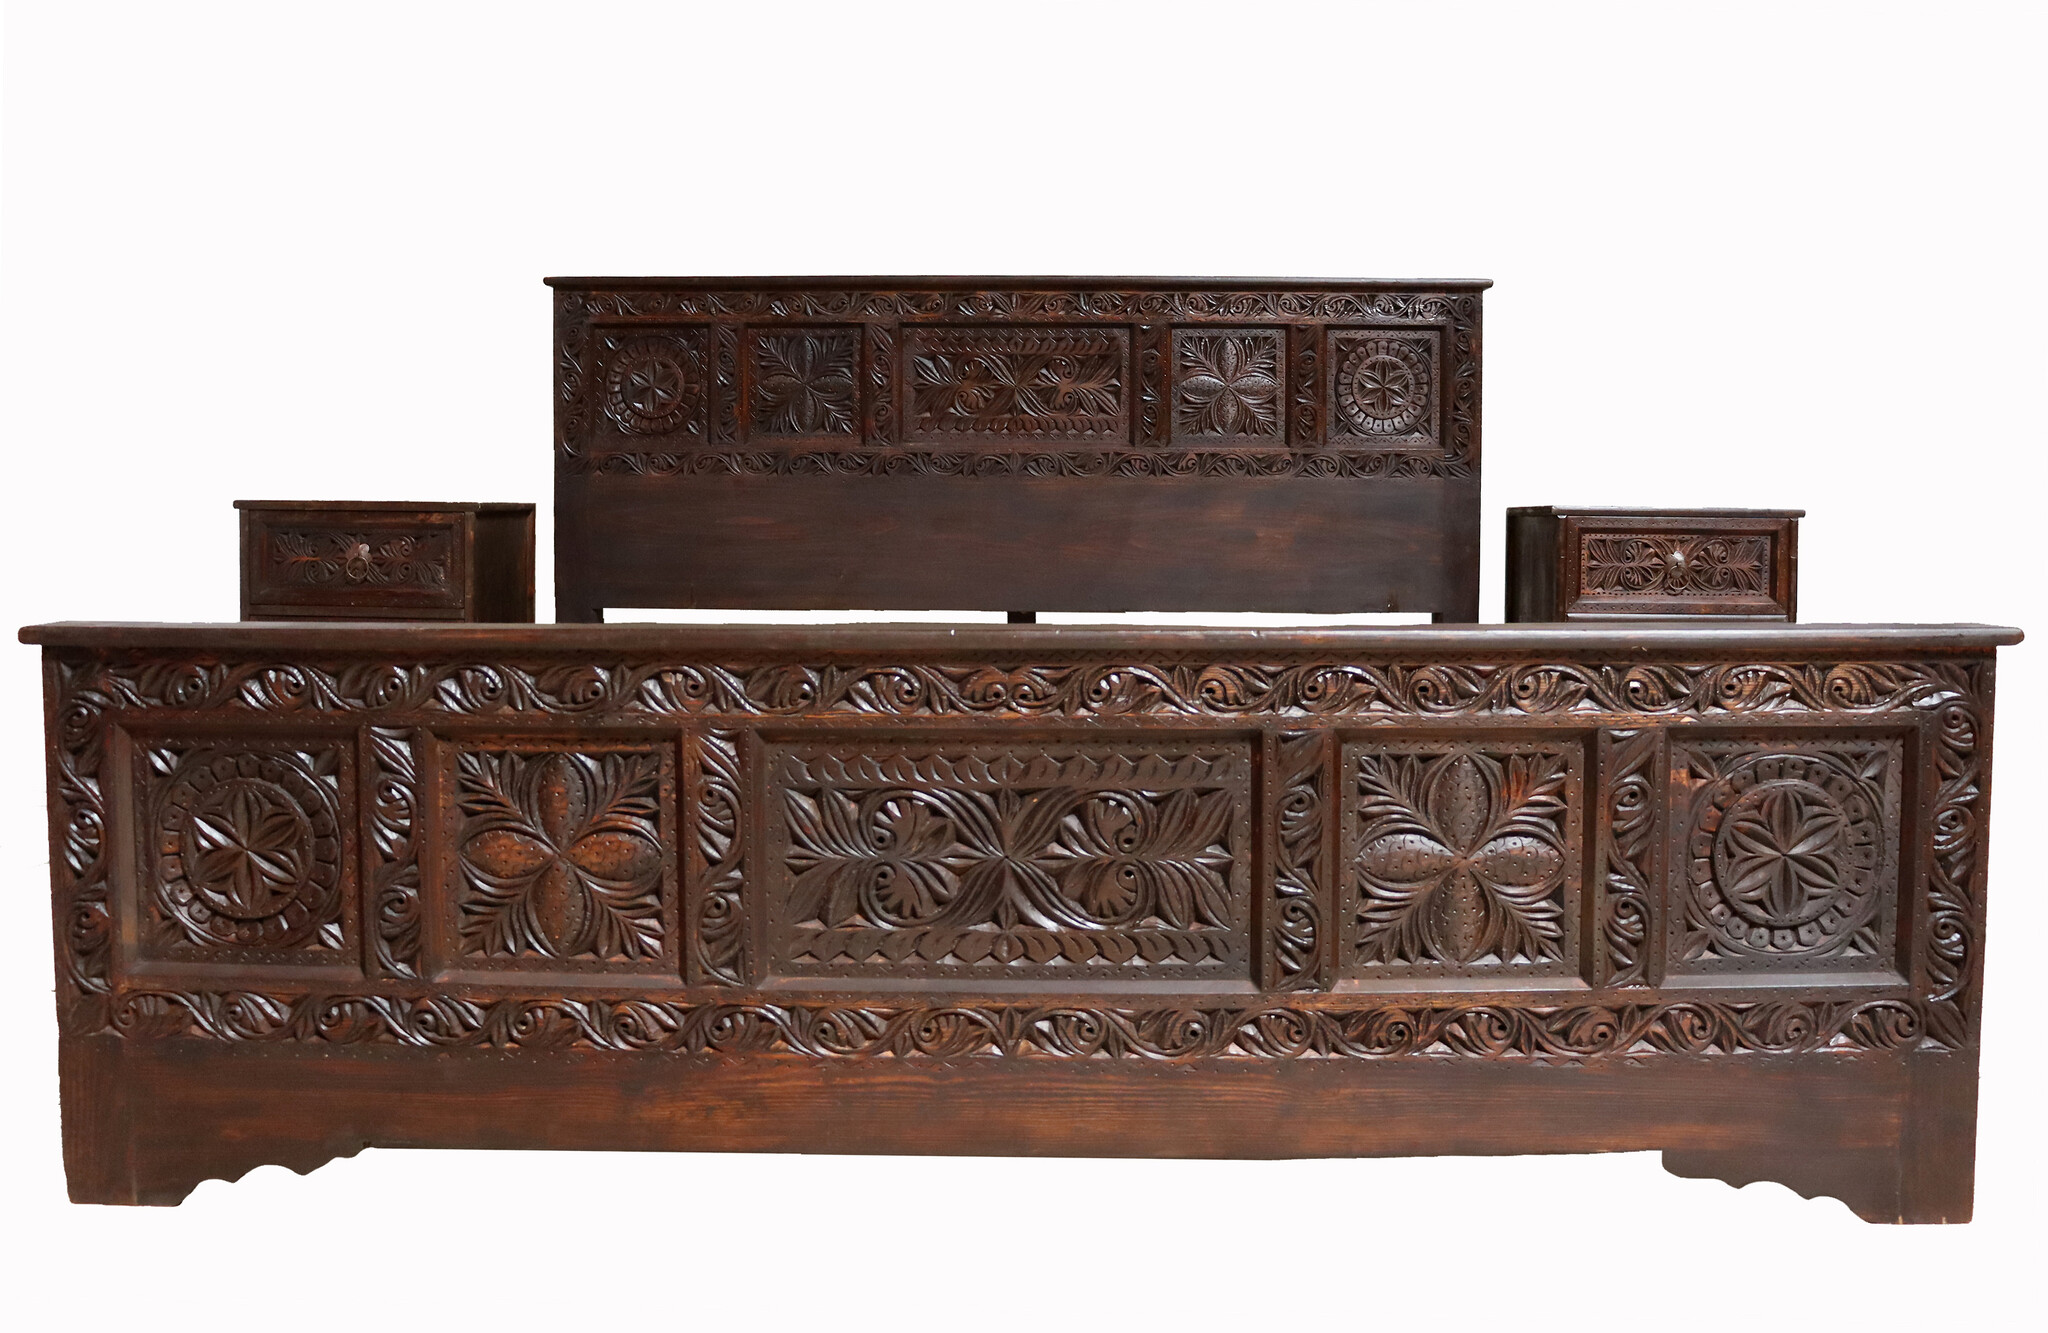 3-piece bedroom set orient hand-carved solid wood bed double bed bedside table  Nuristan  Afghanistan 23B